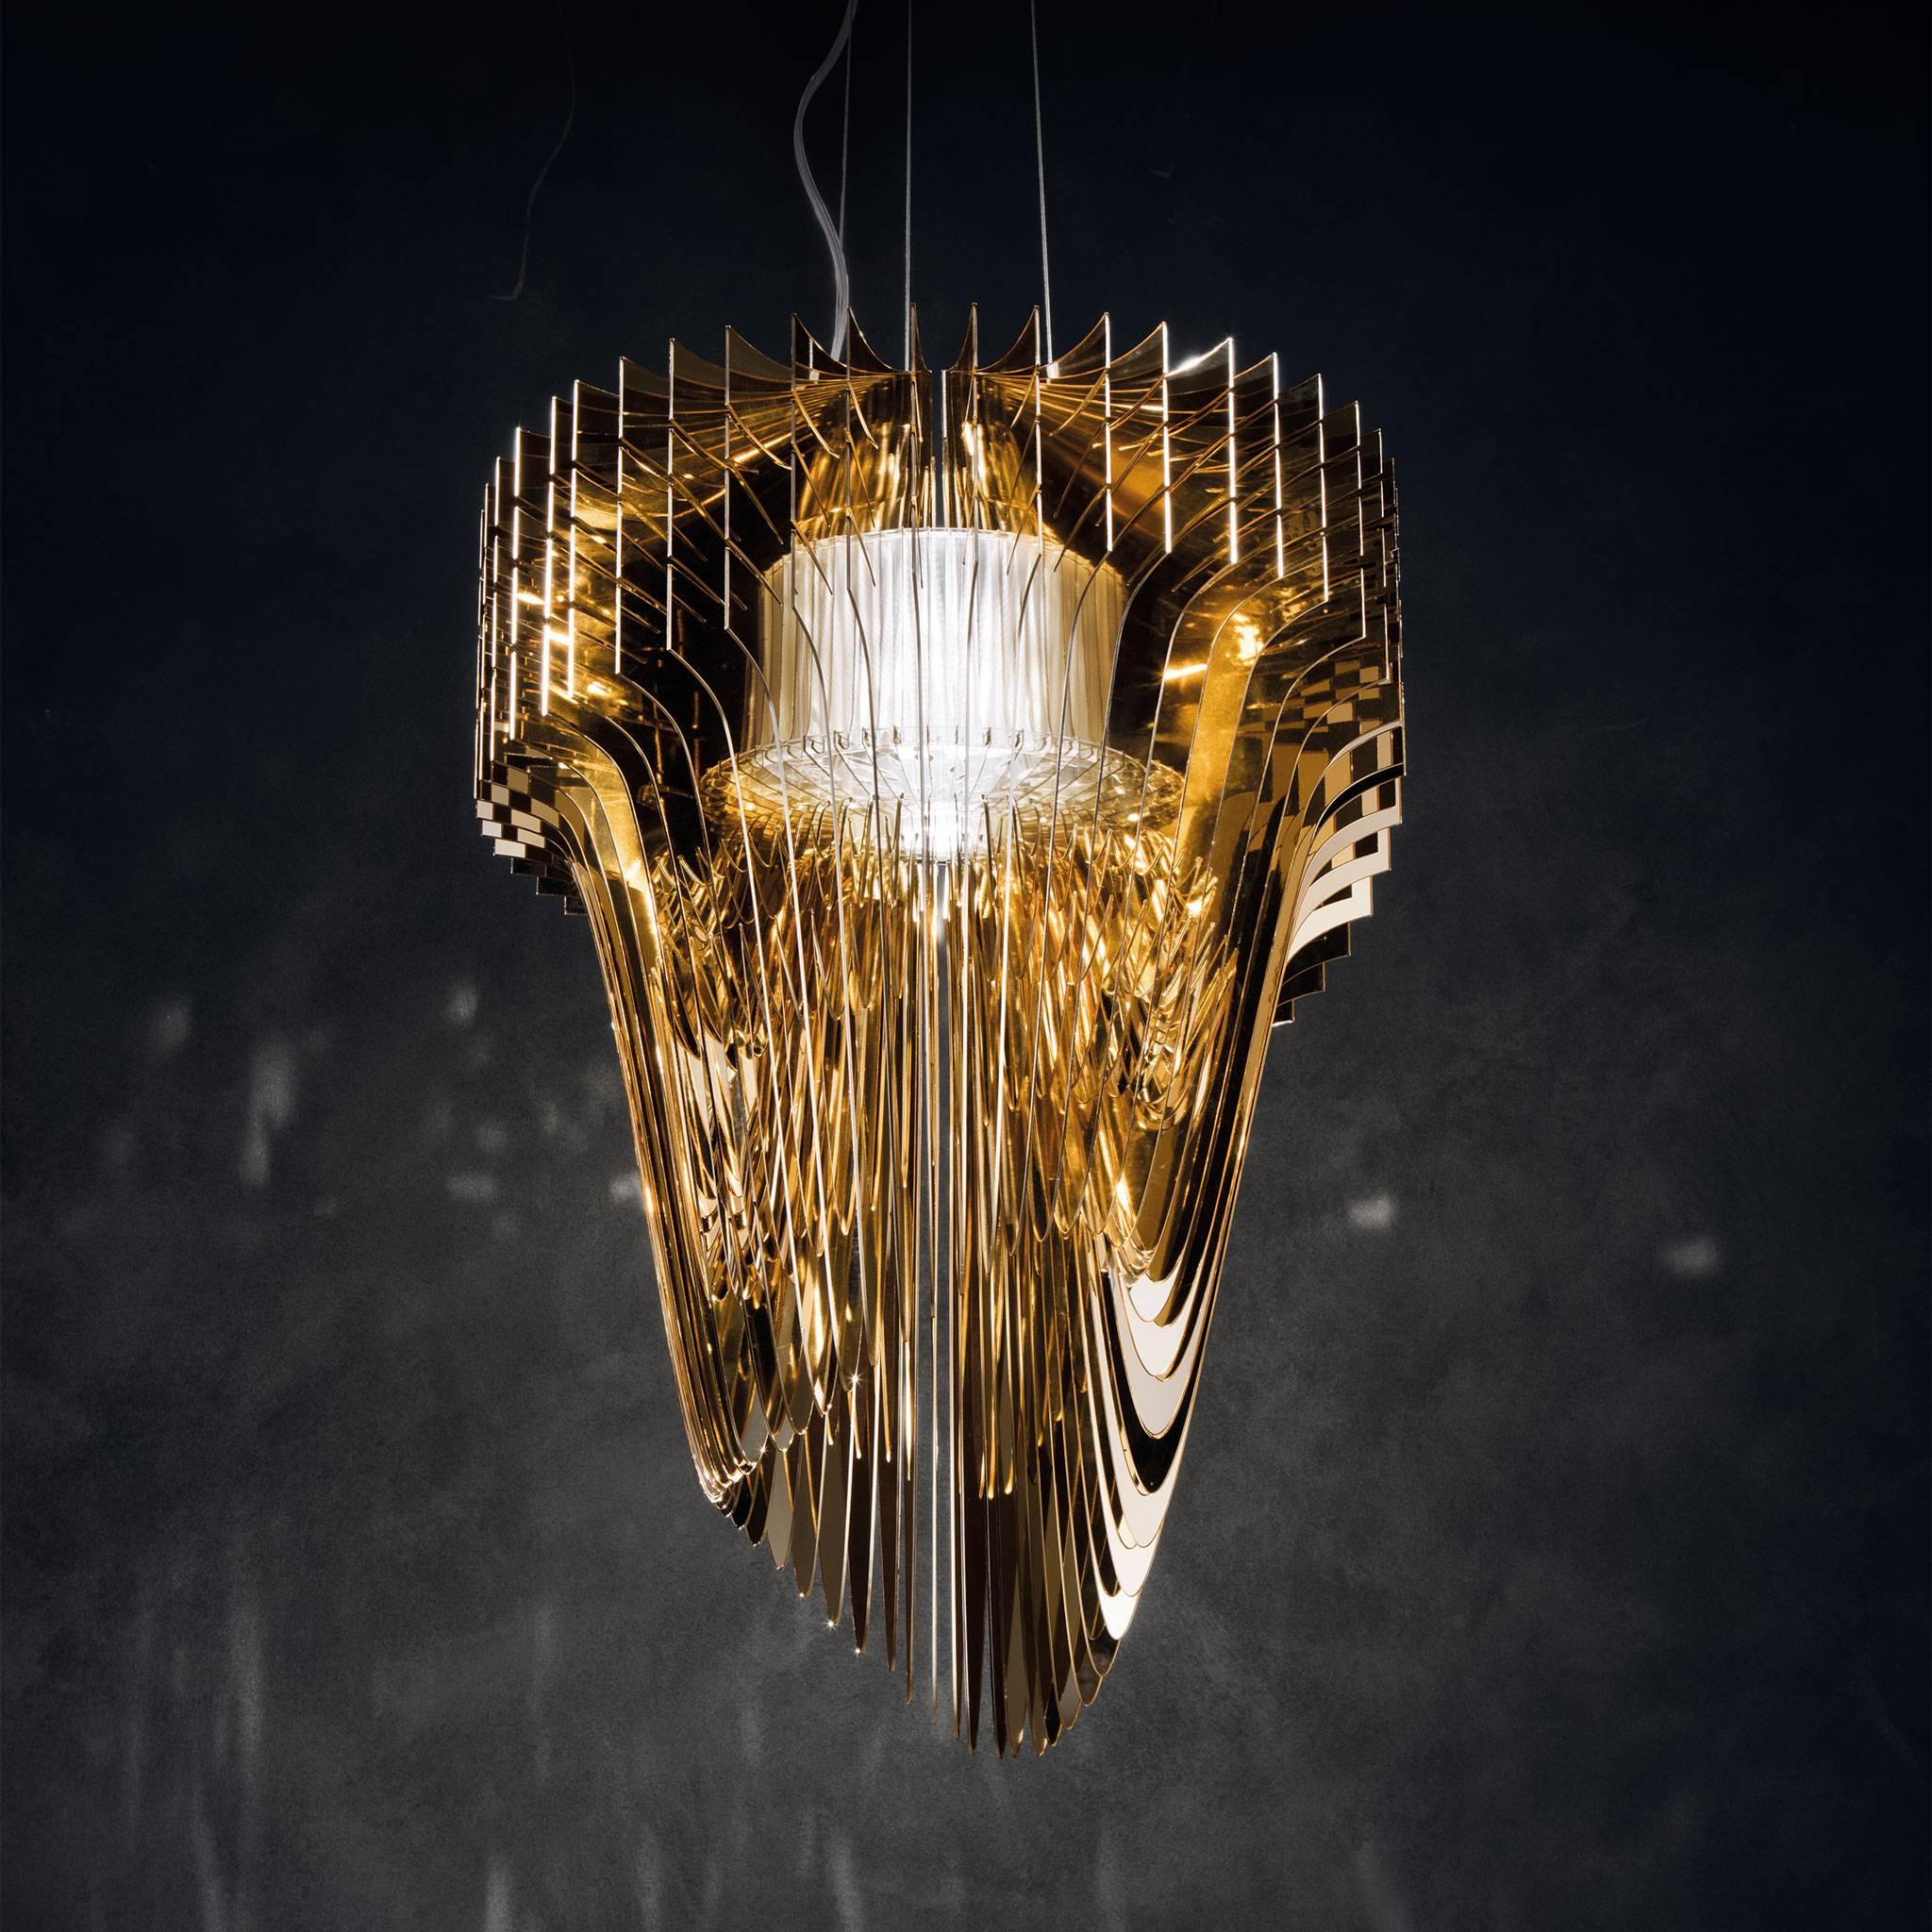 Designed by the late Zaha Hadid for Slamp, the small 'Aria Gold' consists of 50 arms each diverse from the others, radiating around a voluminous LED source. This suspension light has a complex yet fluid contemporary quality and will inject